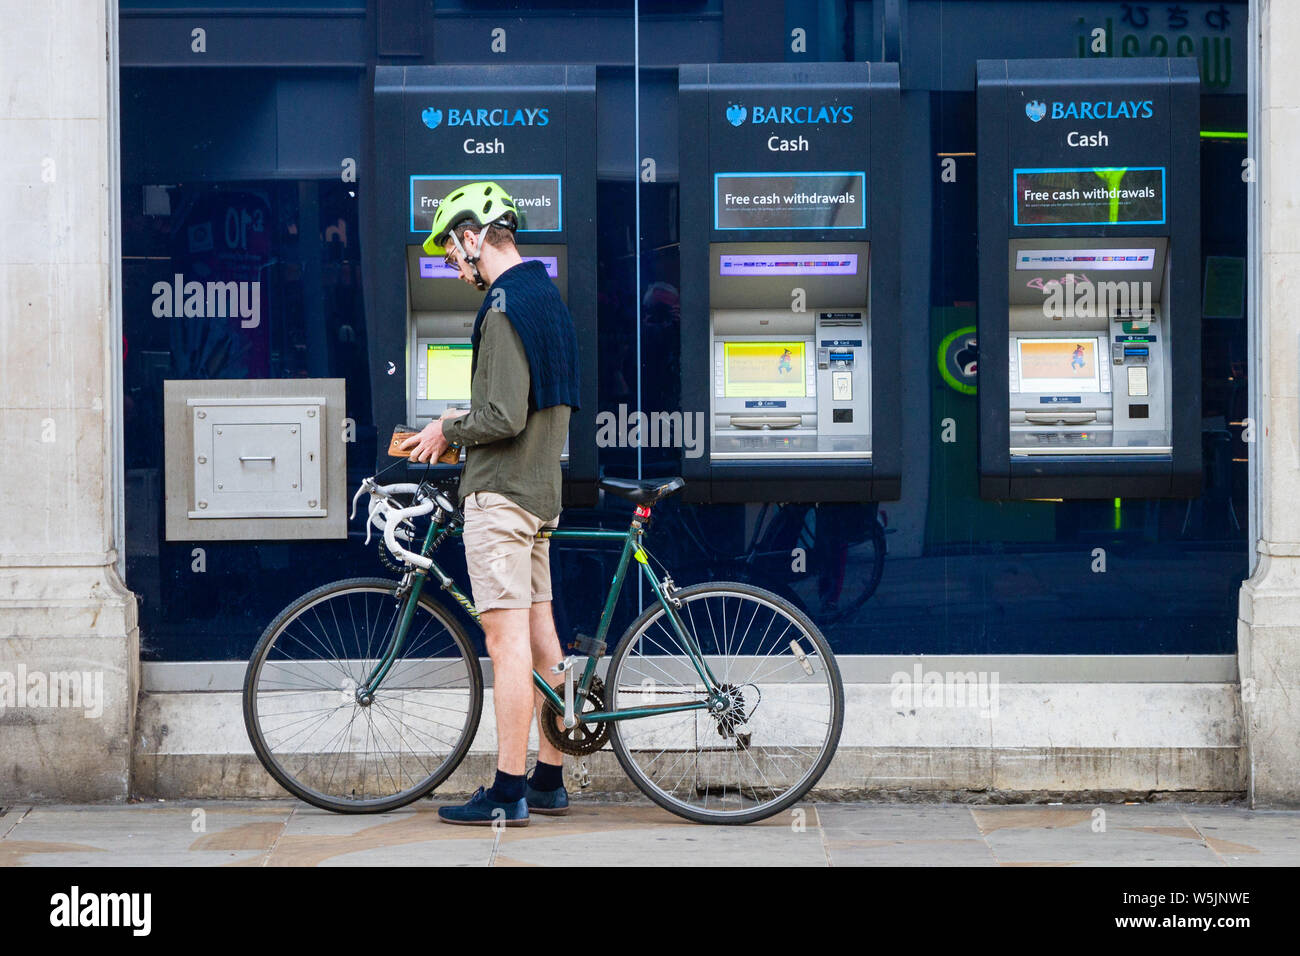 A man on a racing bicycle with cycle helmet gets cash from a Barclays Bank cash machine or ATM Stock Photo